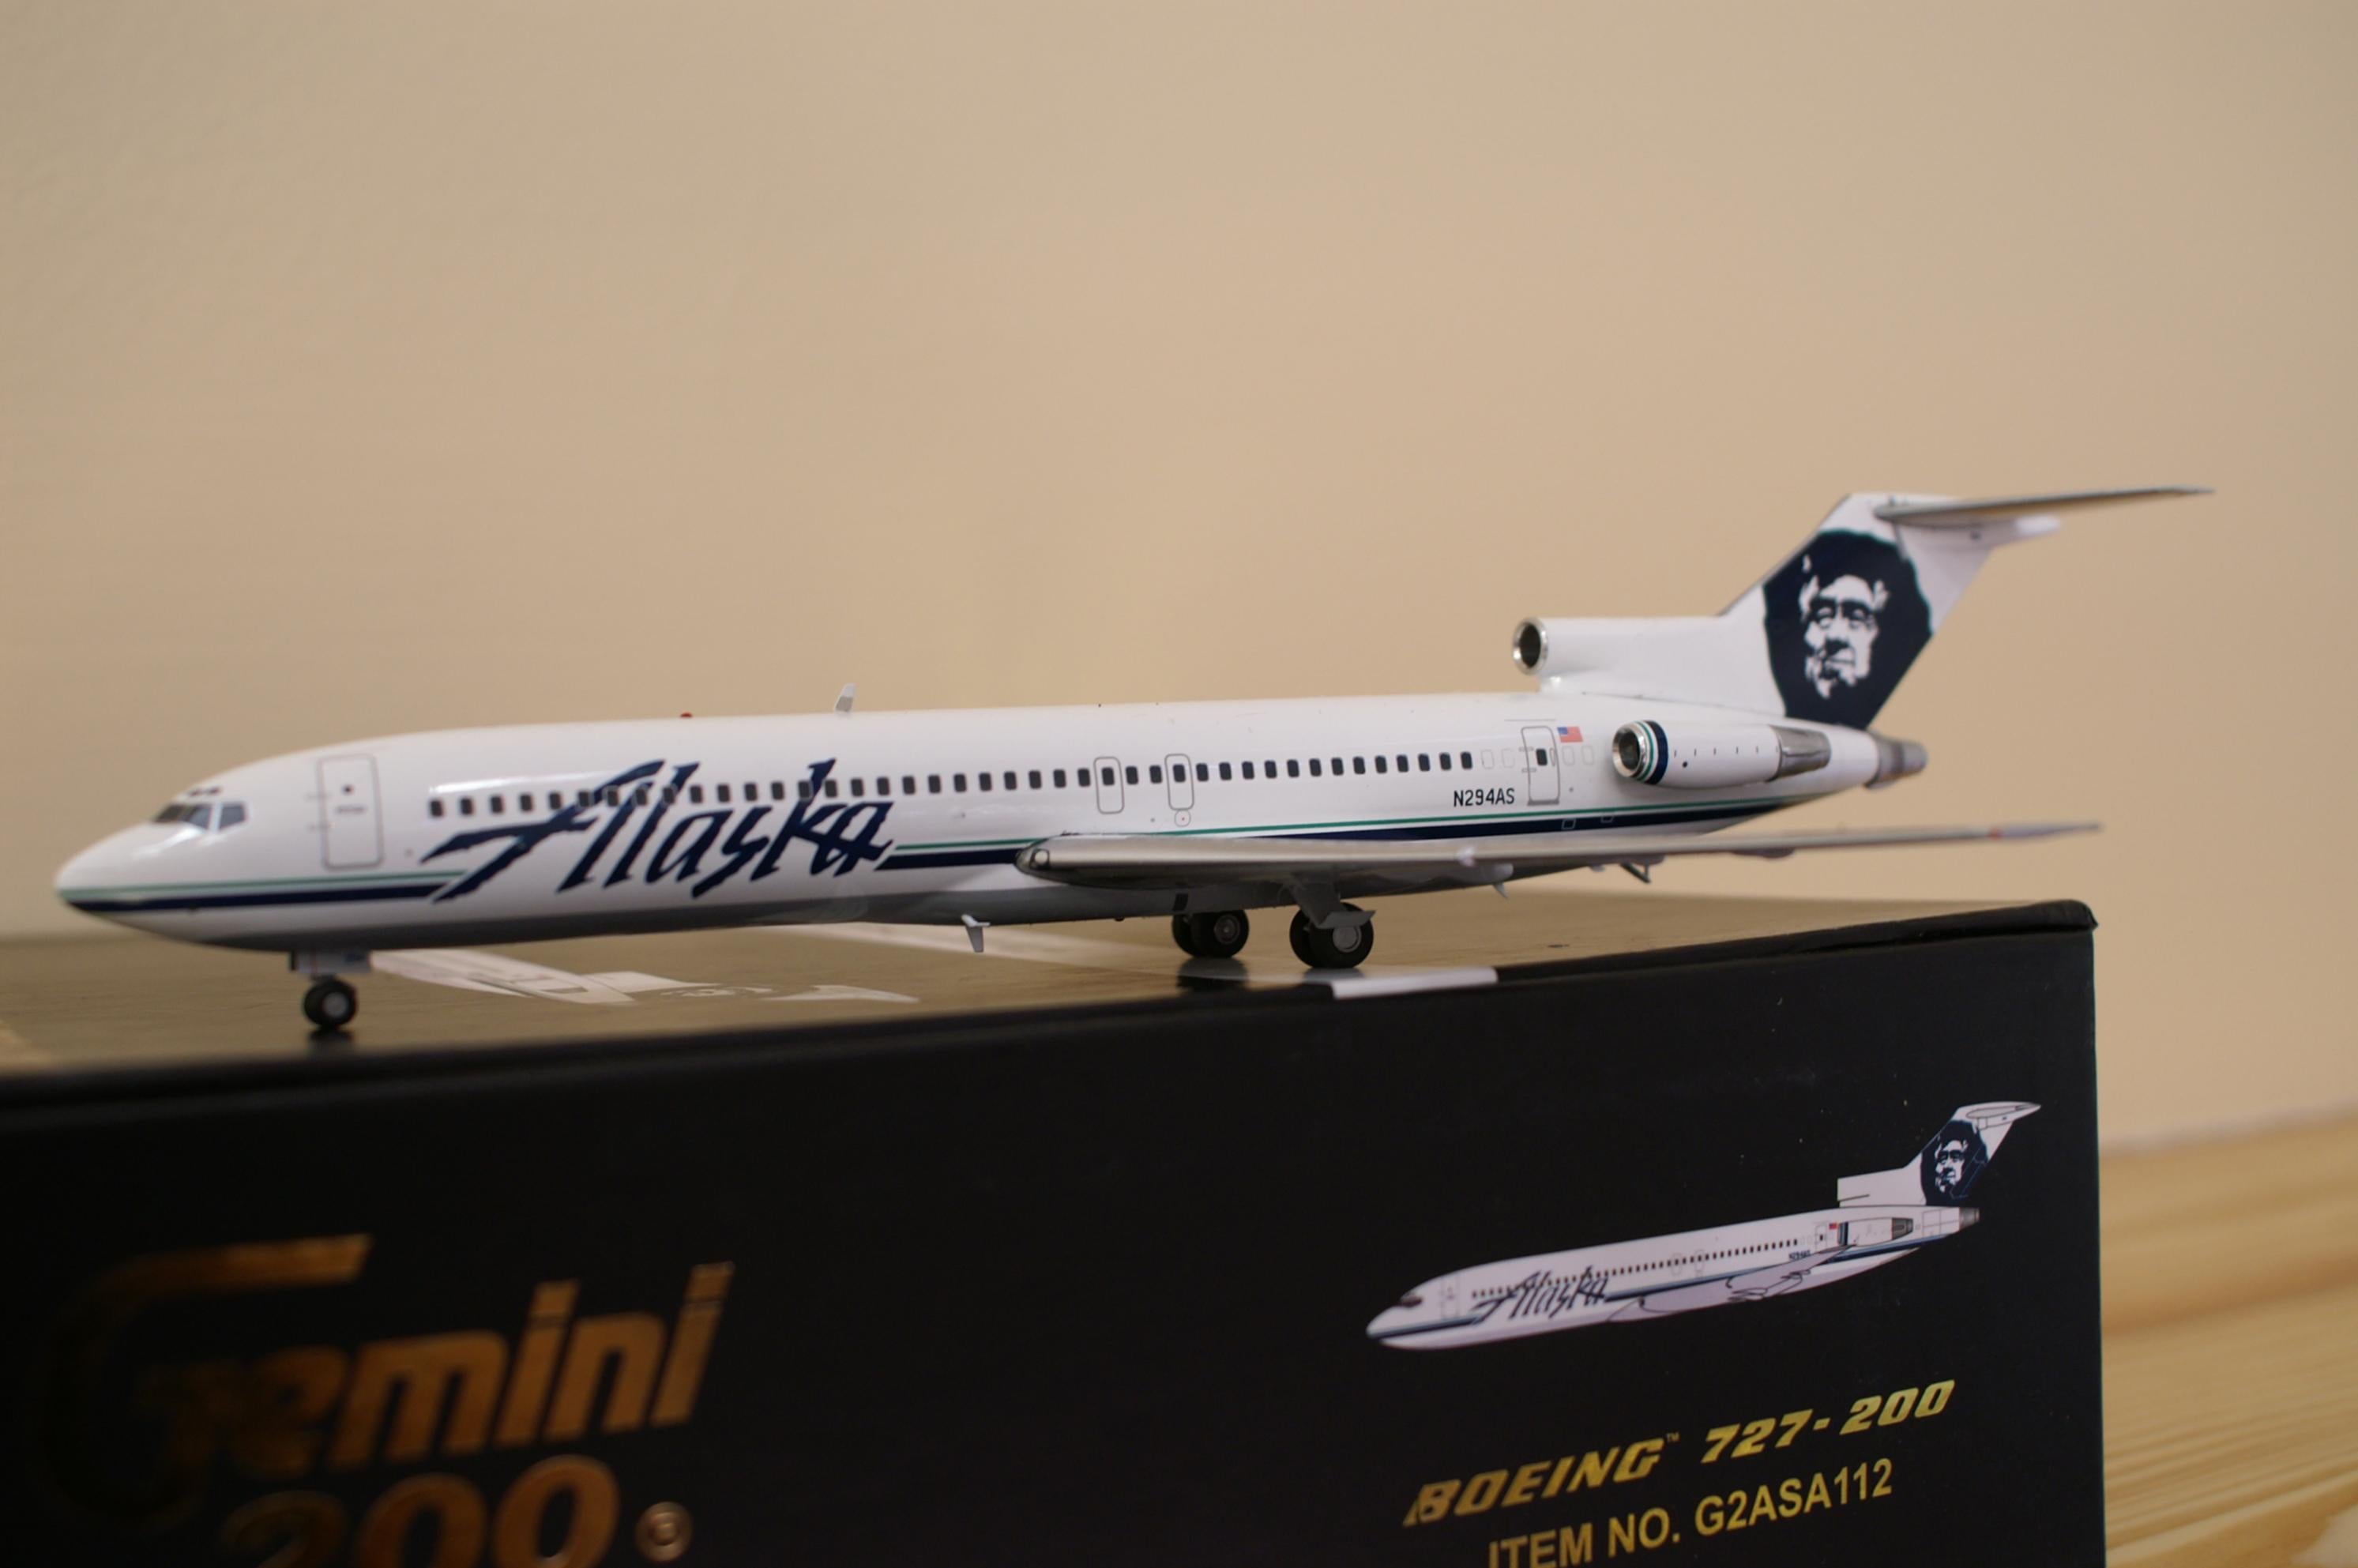 Alaska Boeing 727-200 is landed into my collection - DA.C